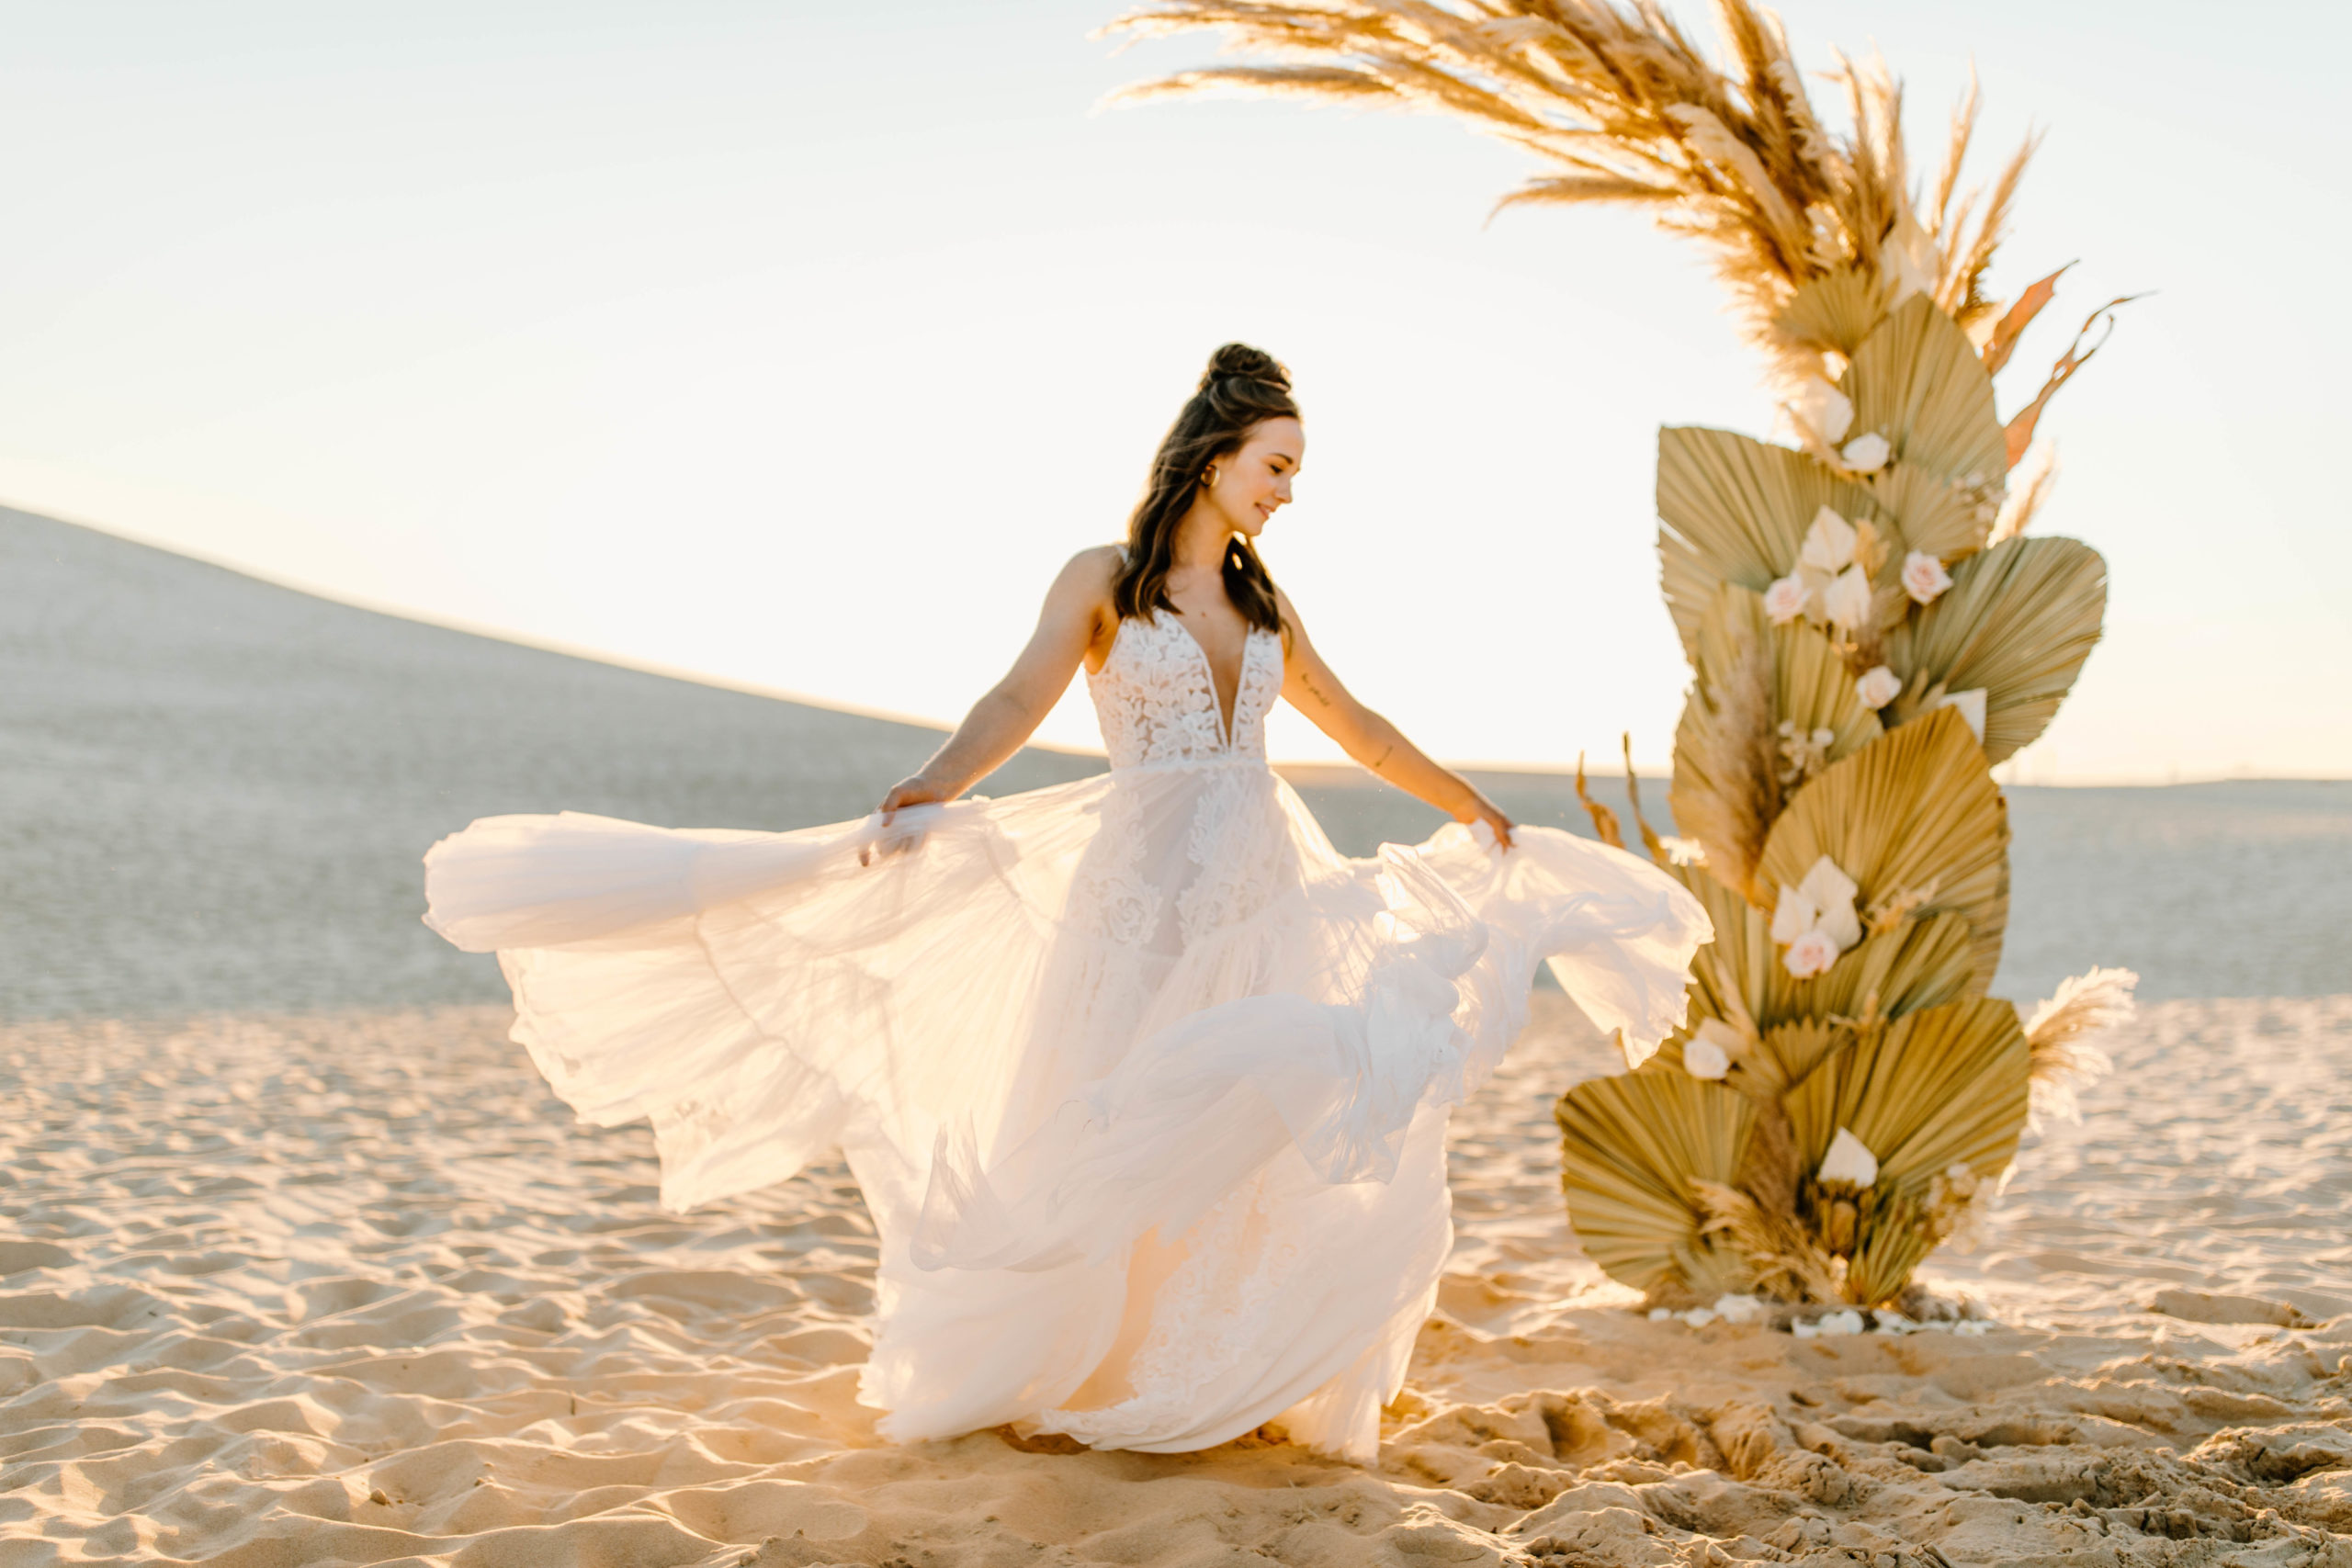 bride twirling in Sand Dunes in boho elopement wedding dress in front of Palms and Pampas Grass